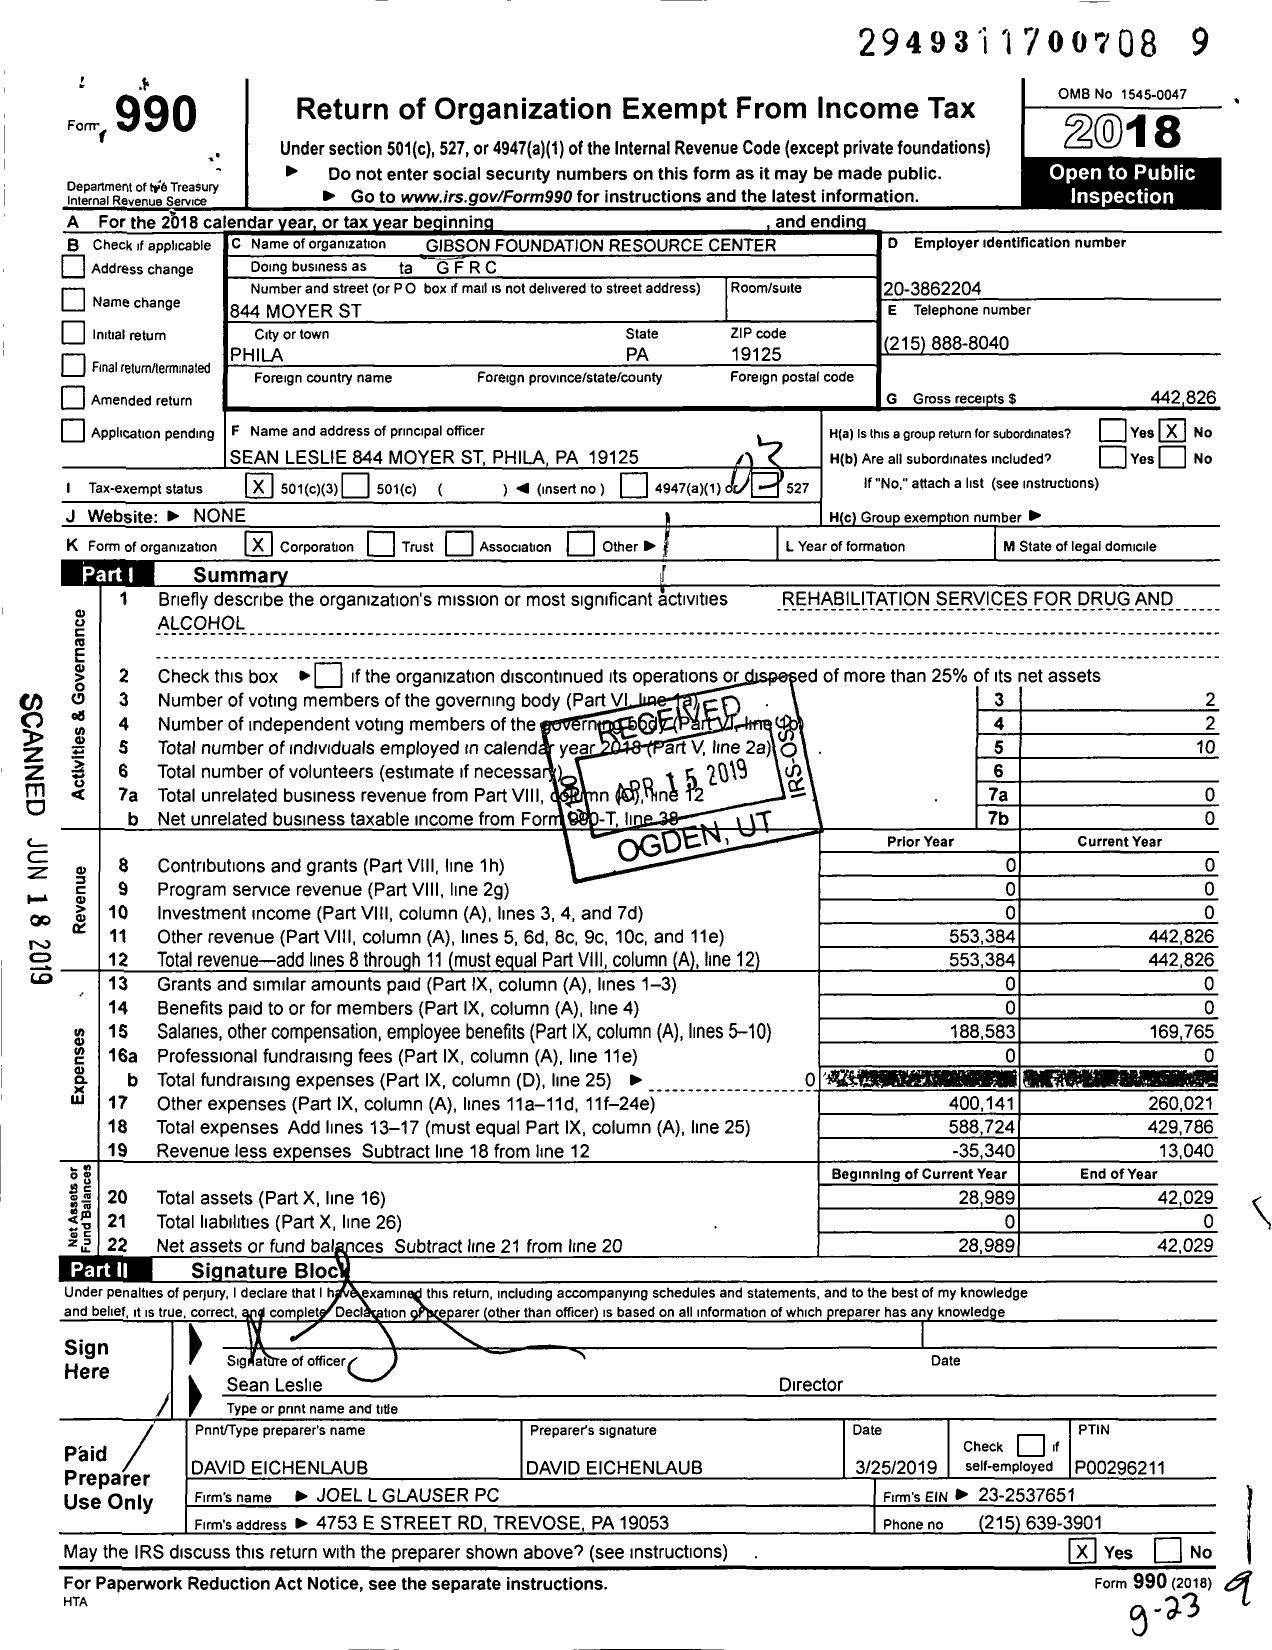 Image of first page of 2018 Form 990 for Ta Gibson Foundation Resource Center